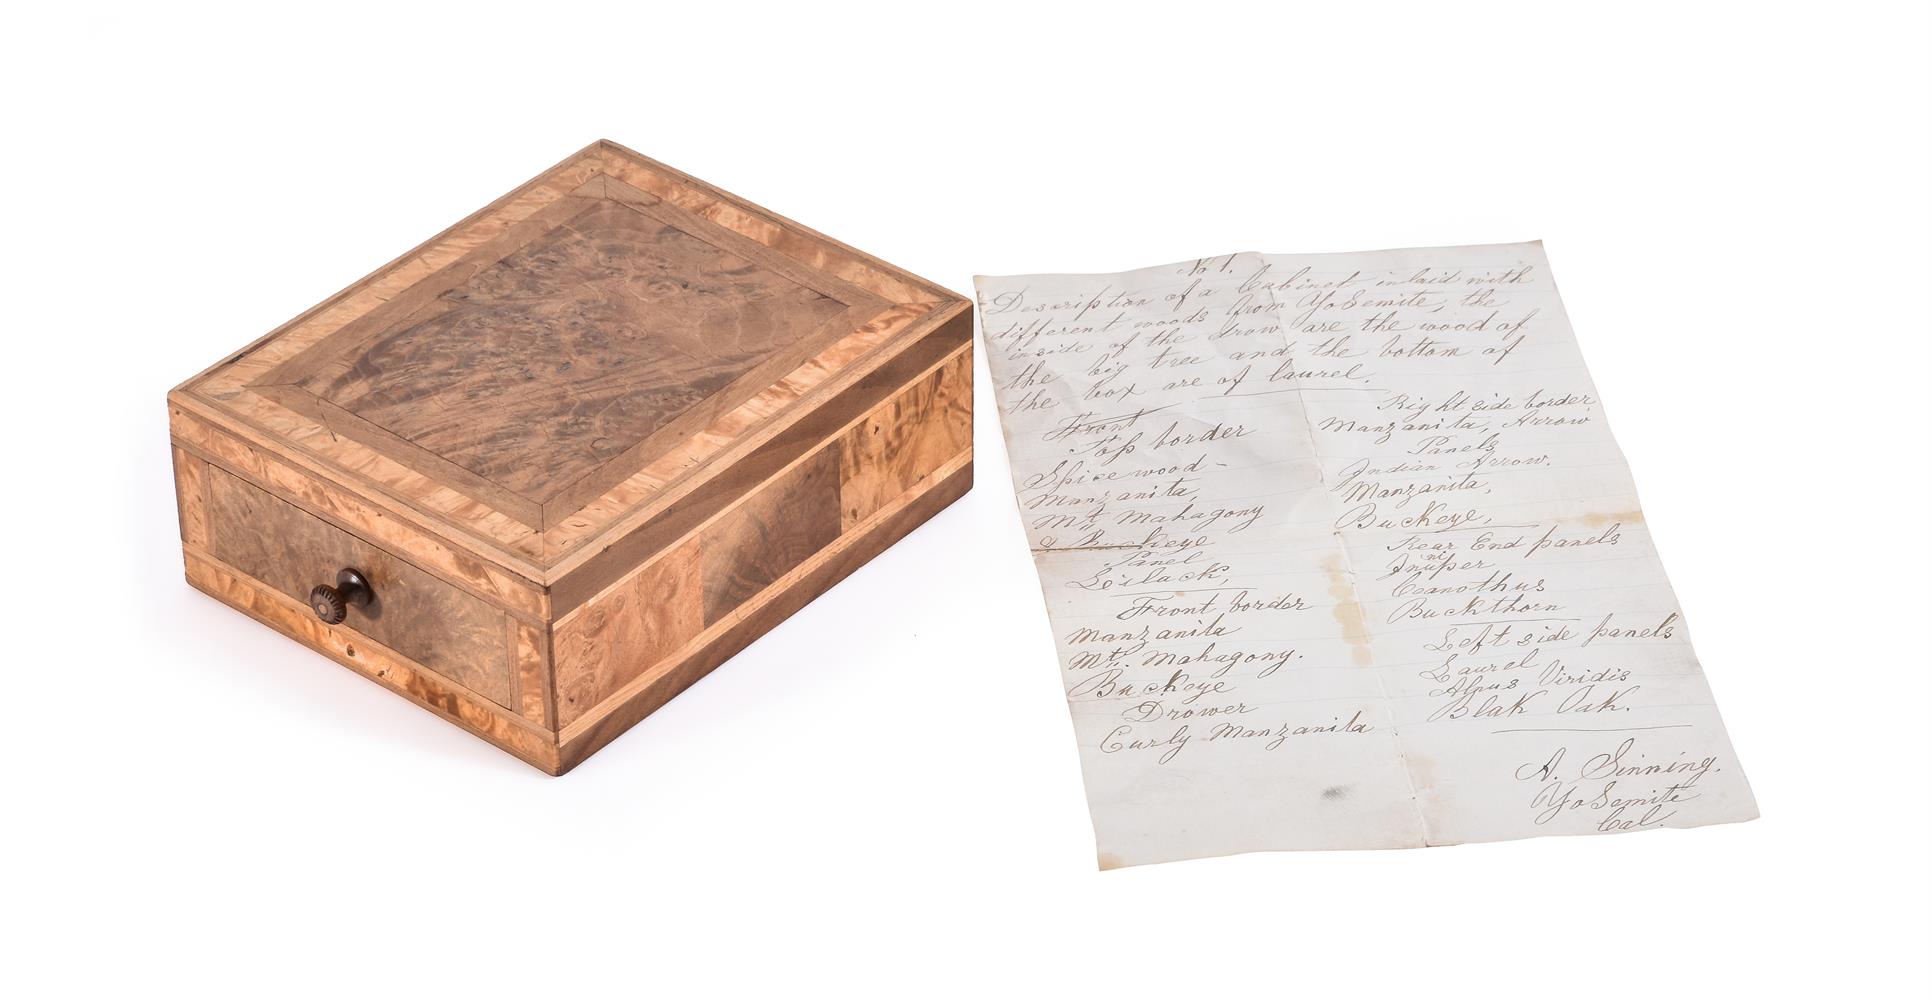 A RARE AMERICAN SPECIMEN WOOD BOX BY ADOLPH SINNING, MID 19TH CENTURY - Image 2 of 6